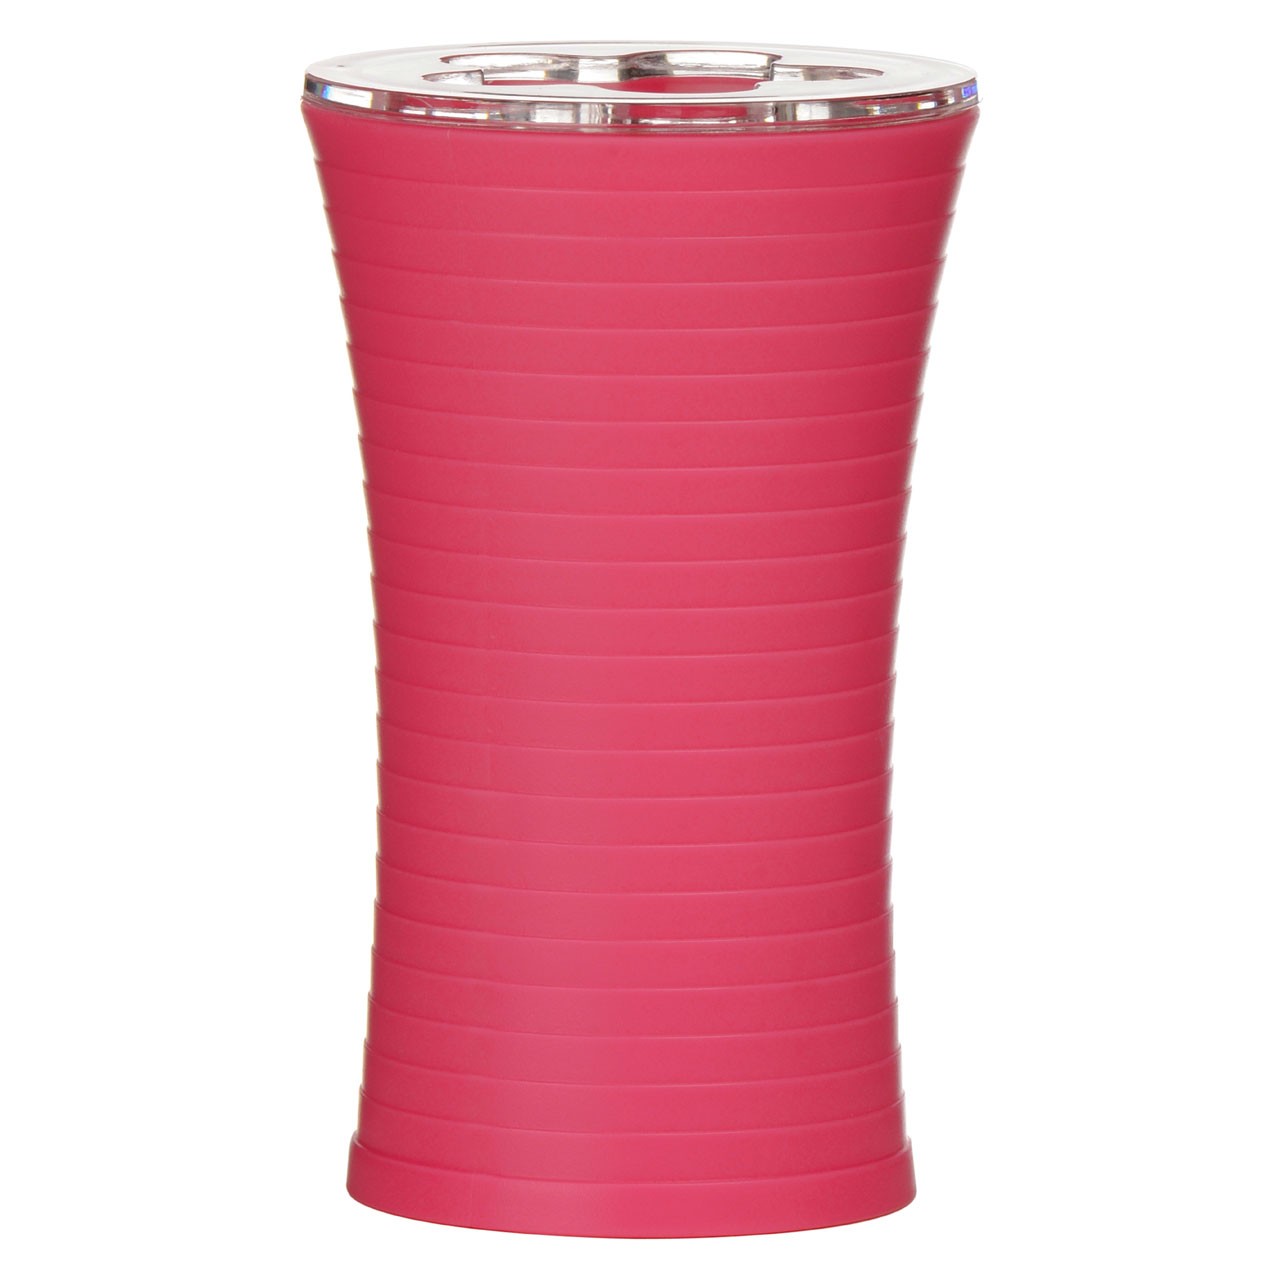 Toothbrush Holder Hot Pink Plastic (ABS)